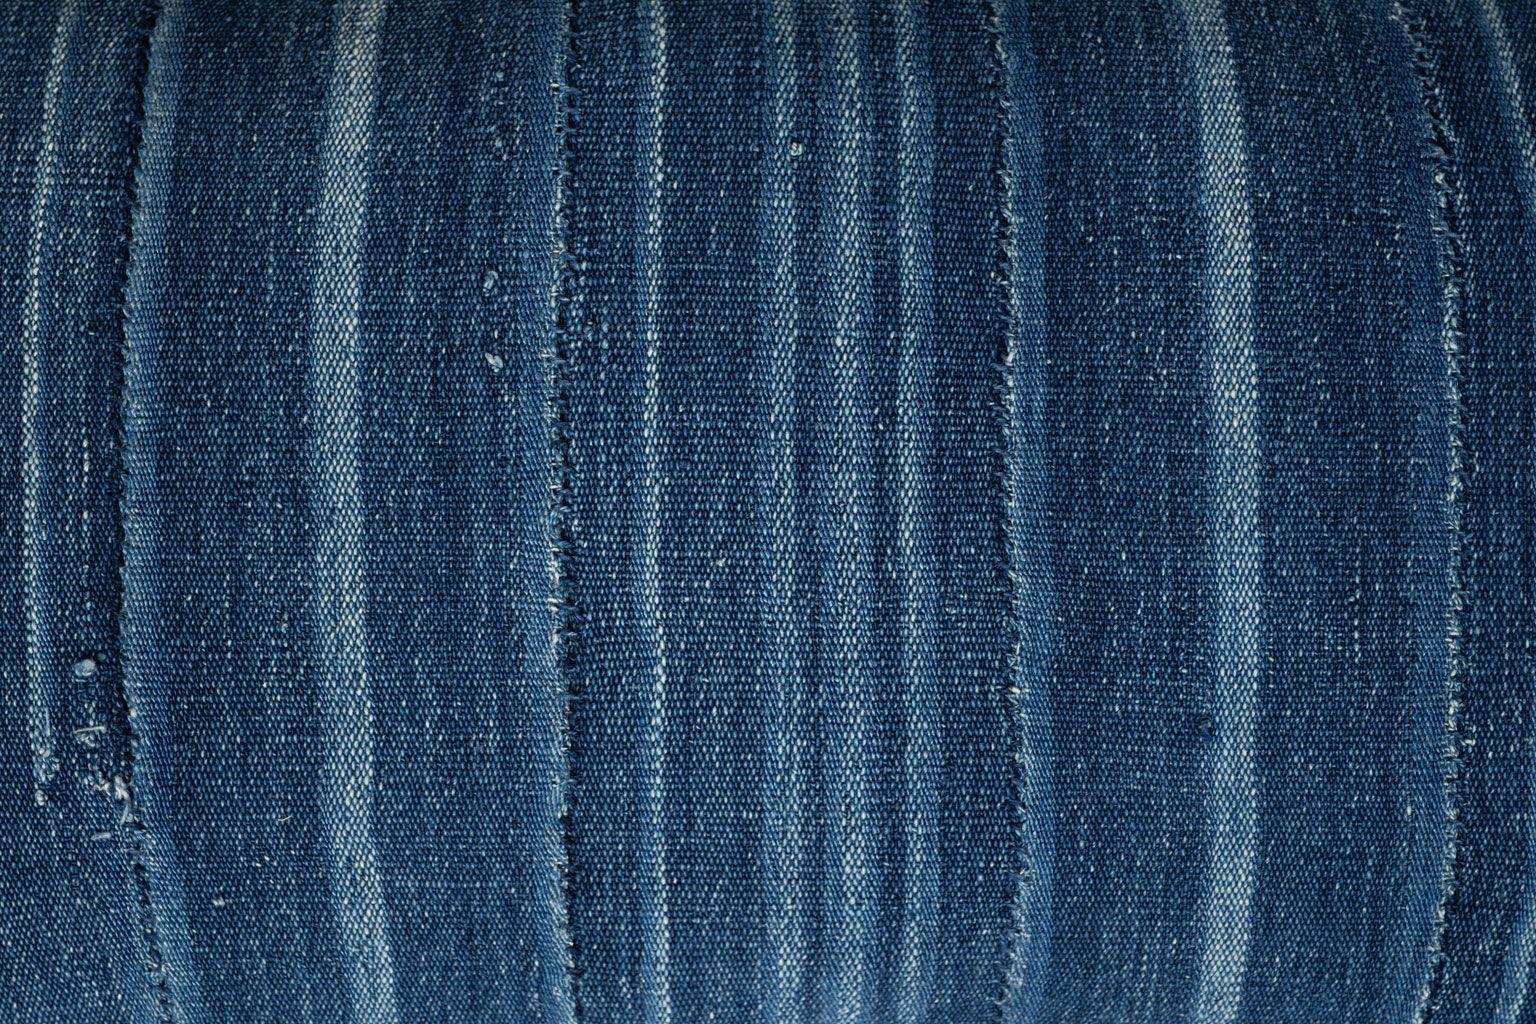 Large size faded indigo tone-on-tone stripe lumbar cushion made from vintage handwoven and hand-dyed slubby cotton fabric. Versatile tone-on-tone indigo stripe runs vertically on one face and is self-backed with same fabric running horizontally.